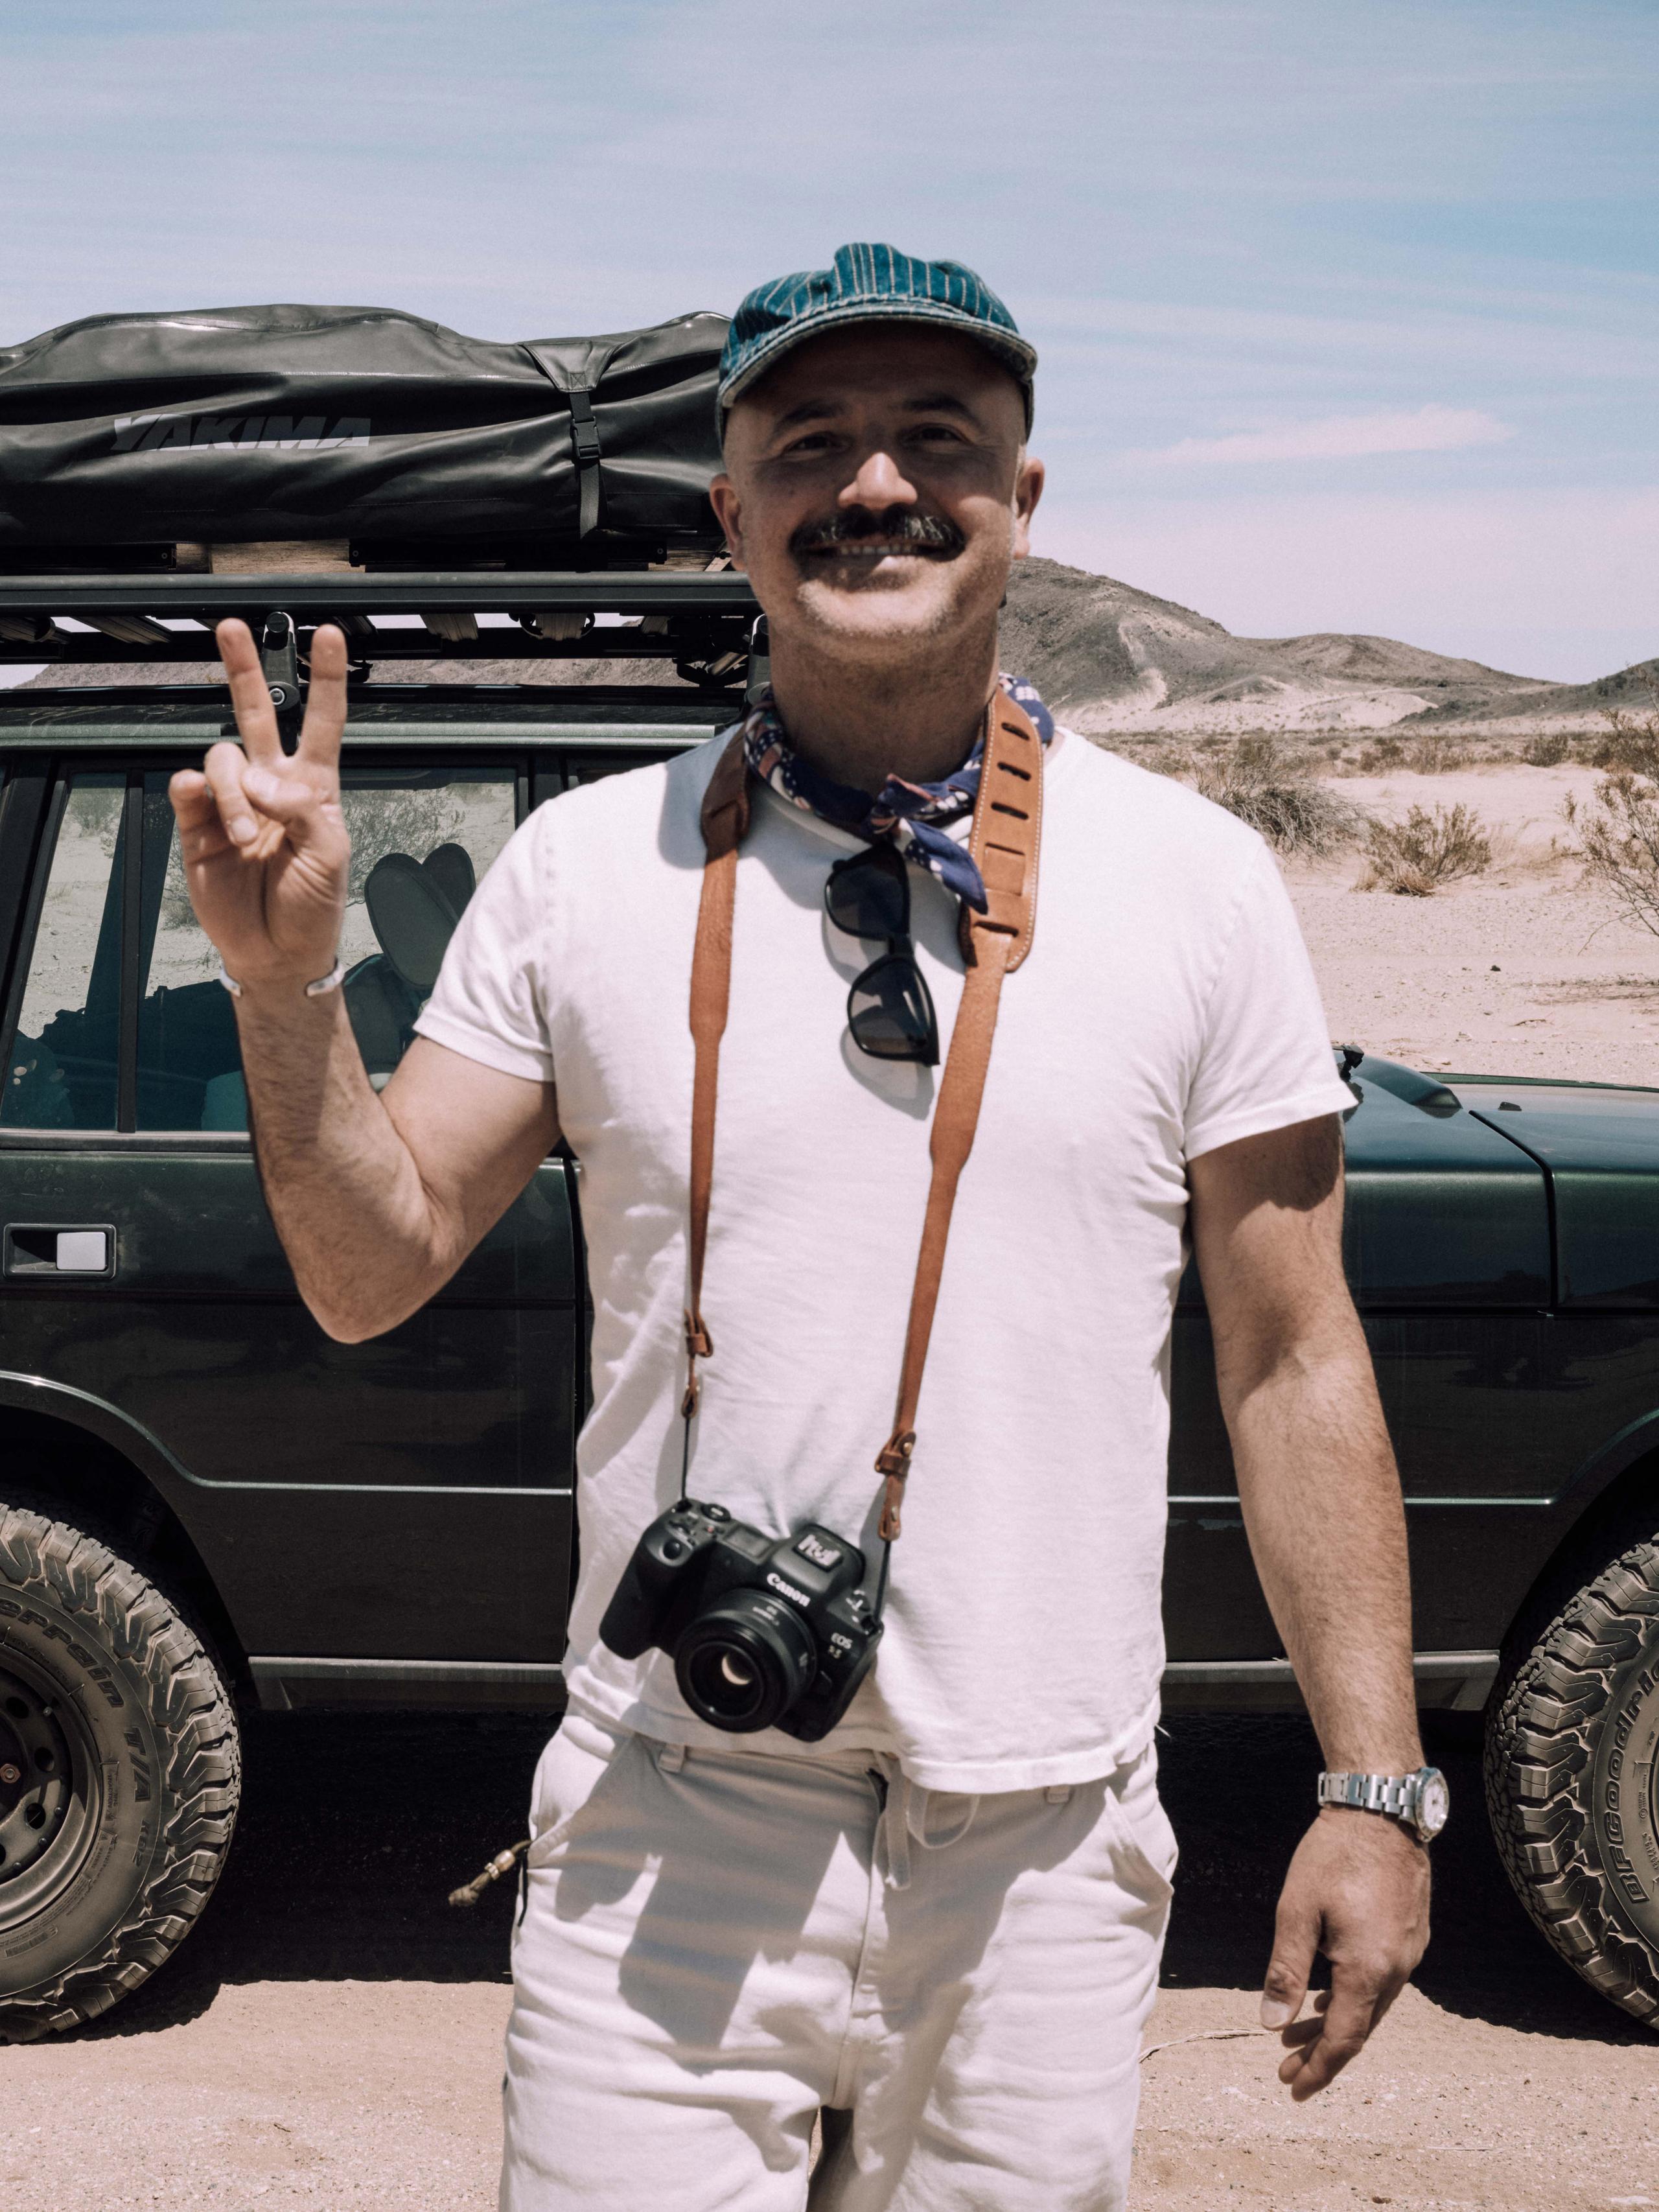 Man smiling and giving the peace sign, standing in front of vintage Land Rover in front of desert landscape